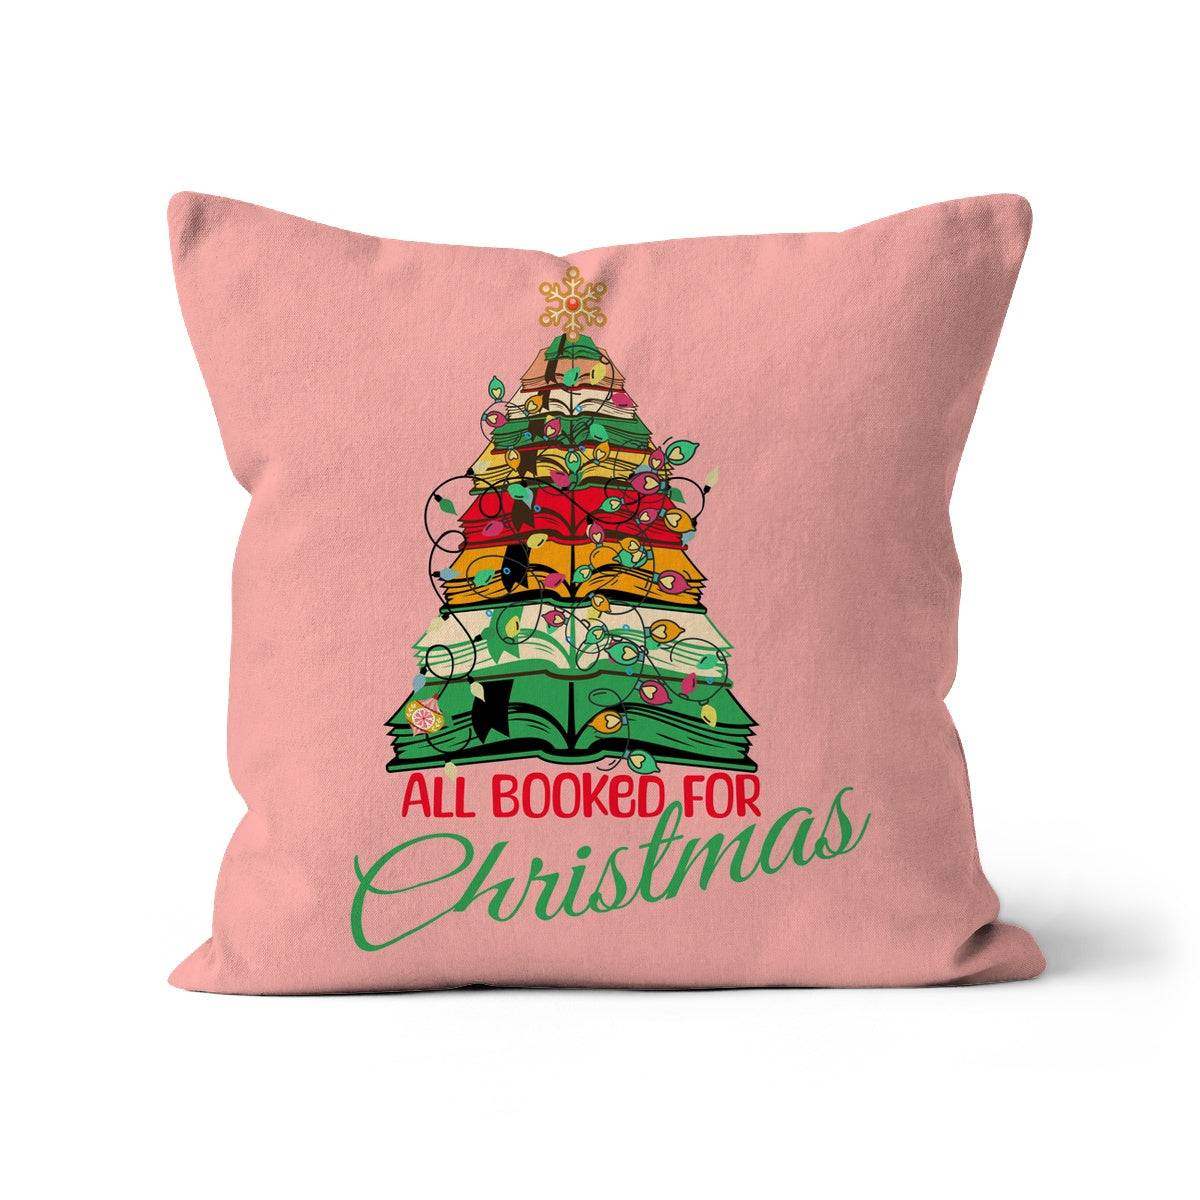 All Booked for Christmas Cushion